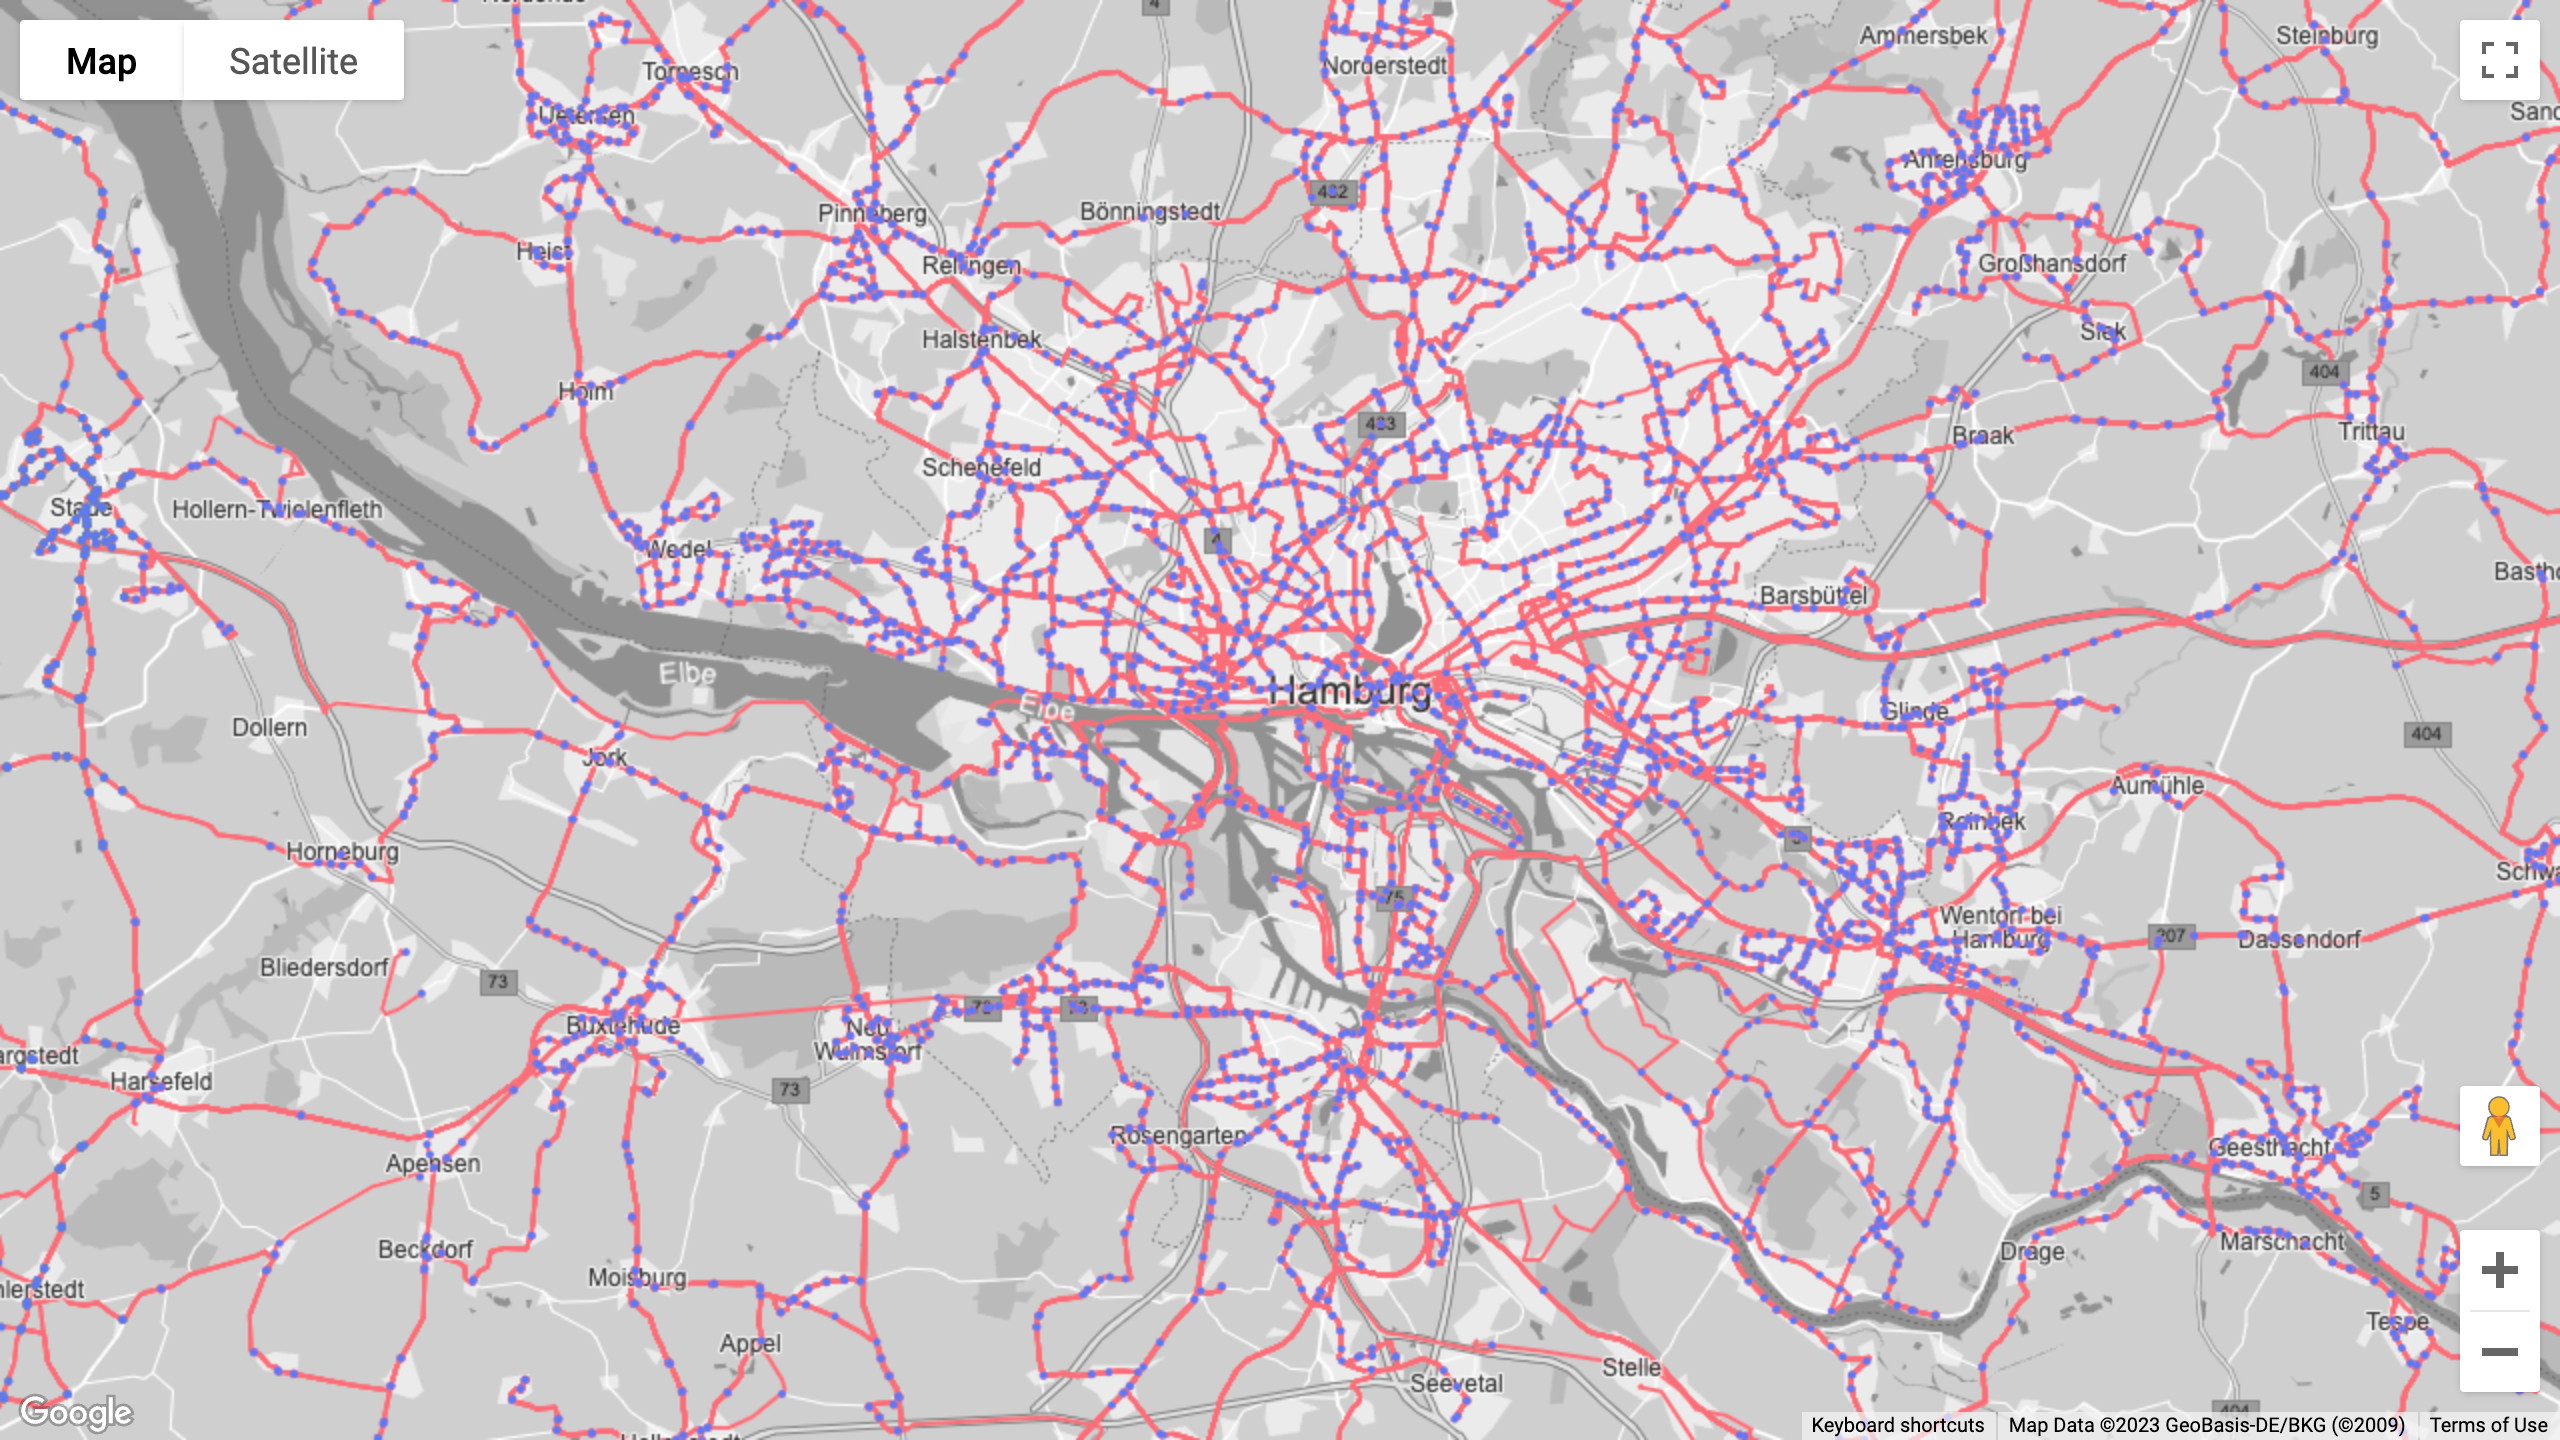 Hamburg's public transport lines and stops on a grey Google map